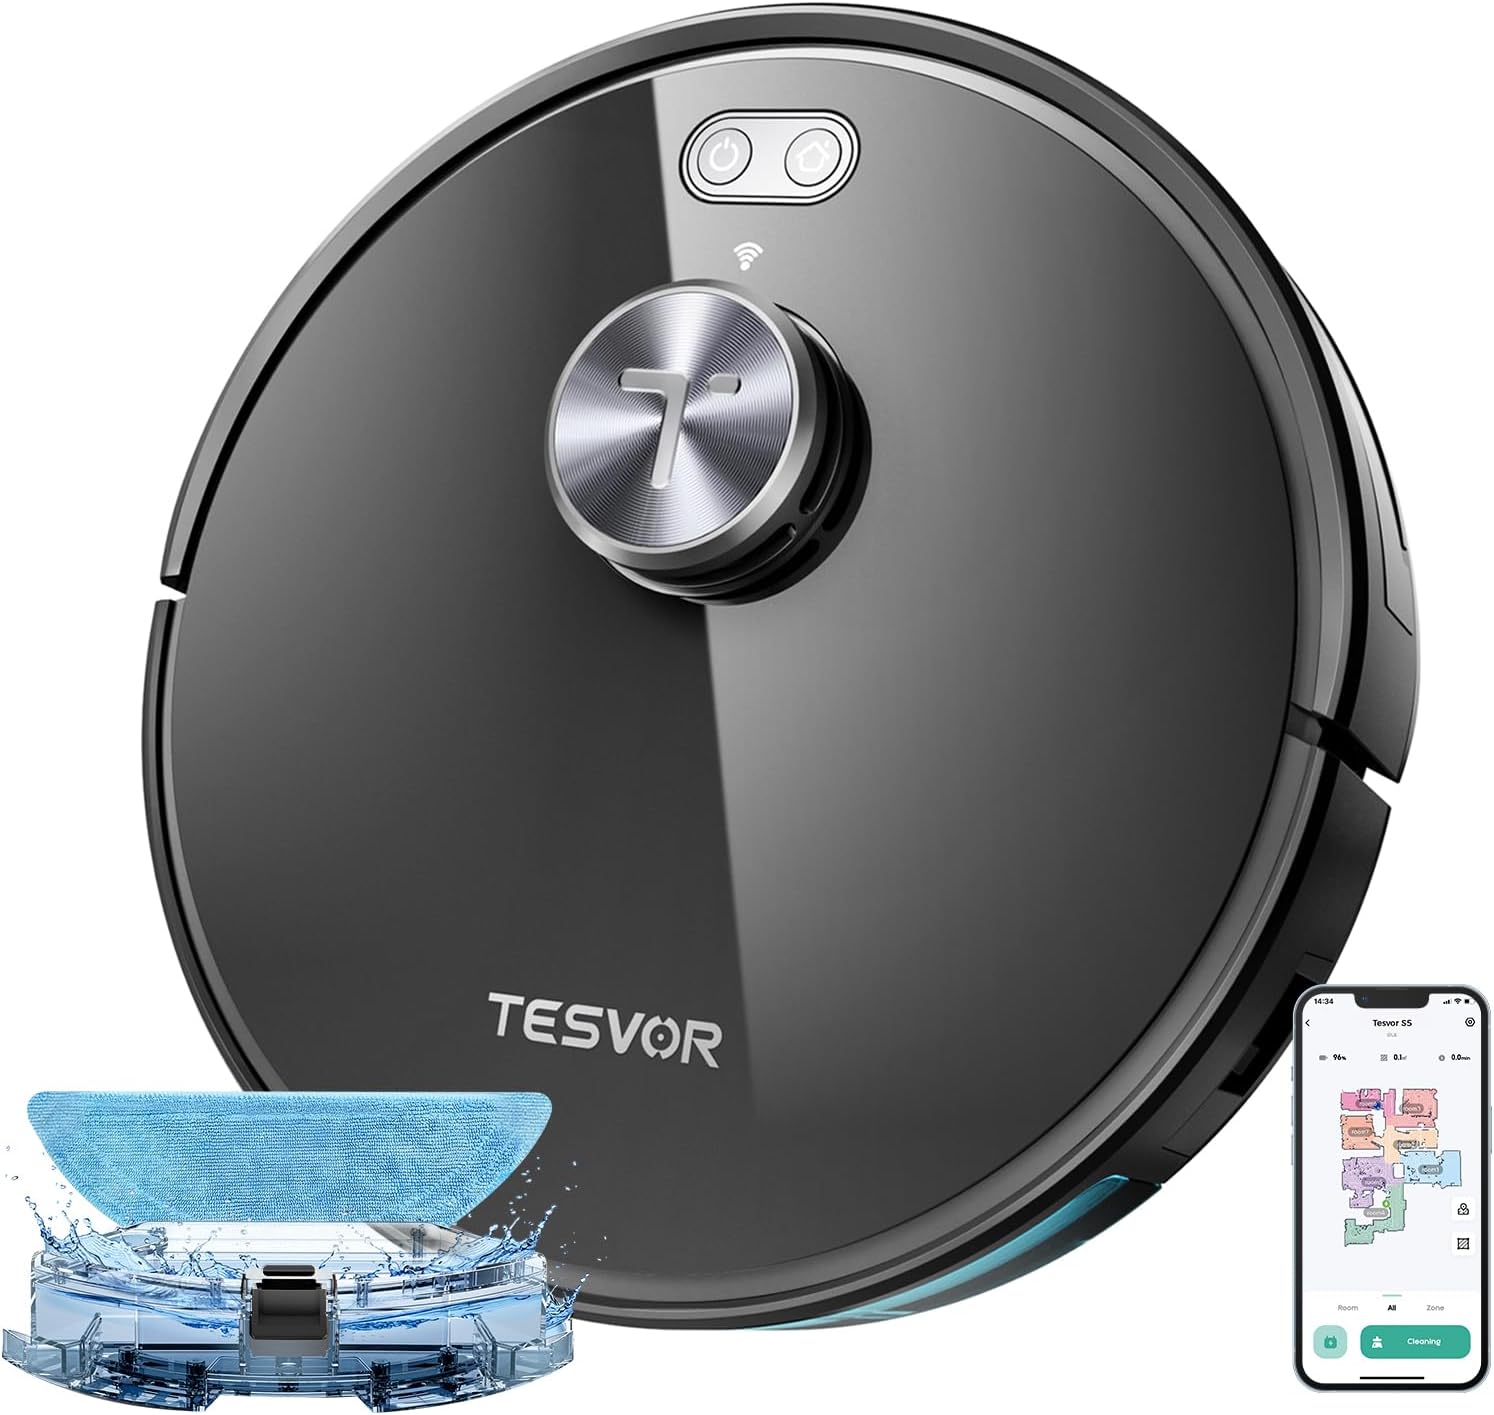 Read more about the article Tesvor S5 Max Review